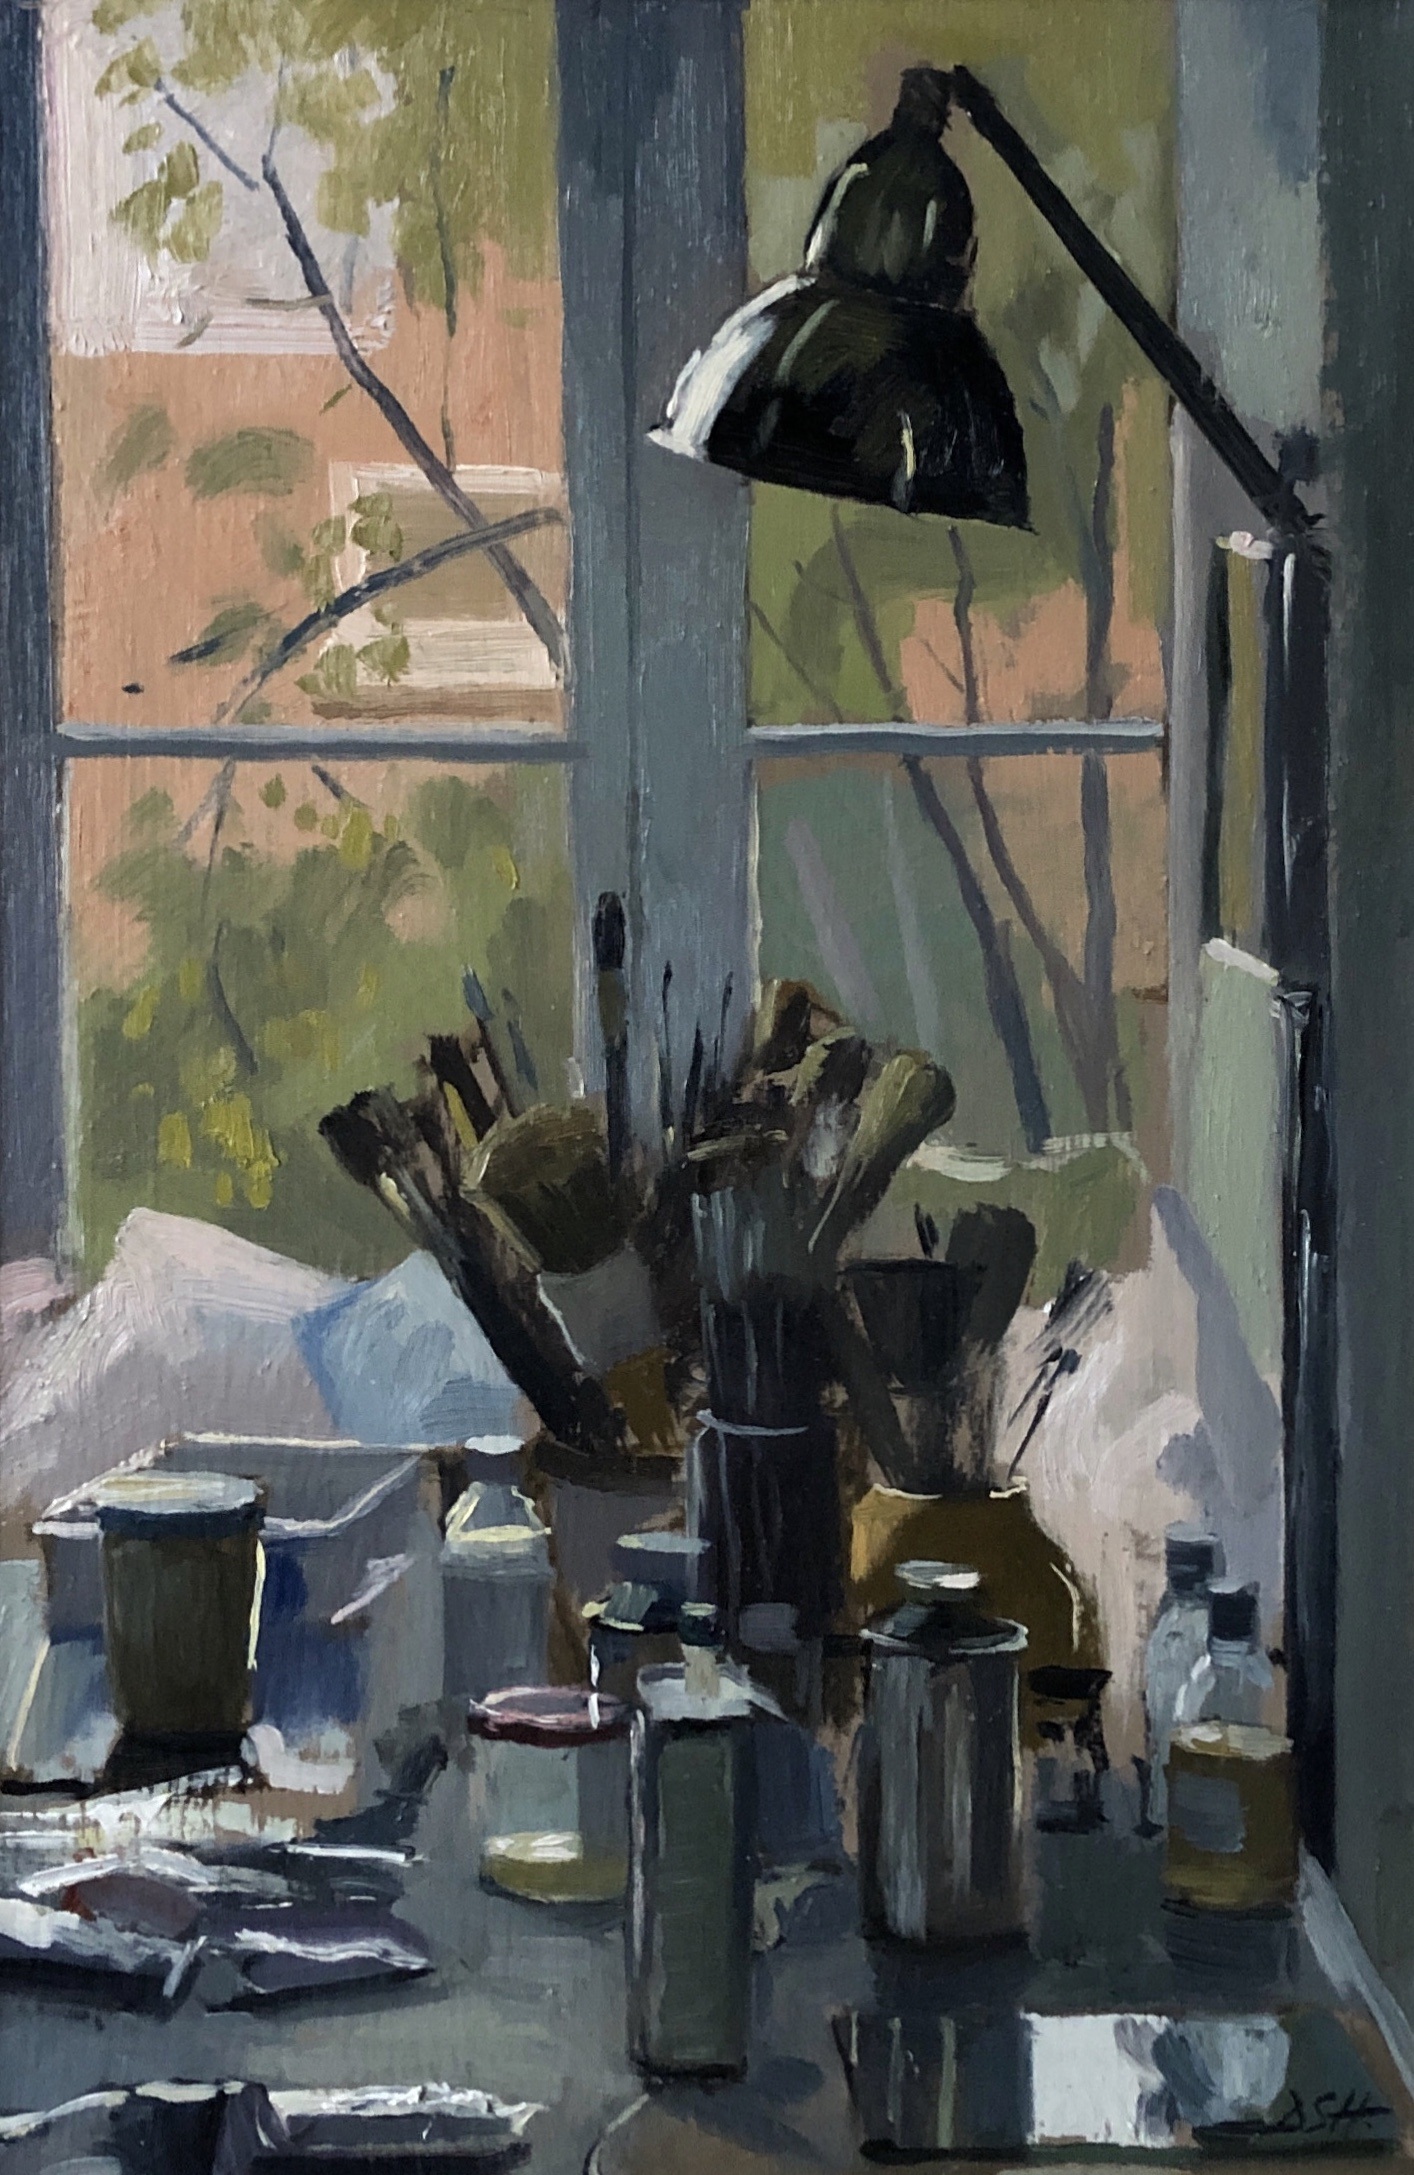 Daisy has been awarded The Gordon Hulson Memorial Prize by the Royal Society of British Artists for her painting 'Studio Contre-Jour'.  This prize recognizes excellence in draughtsmanship, variety and exploration.